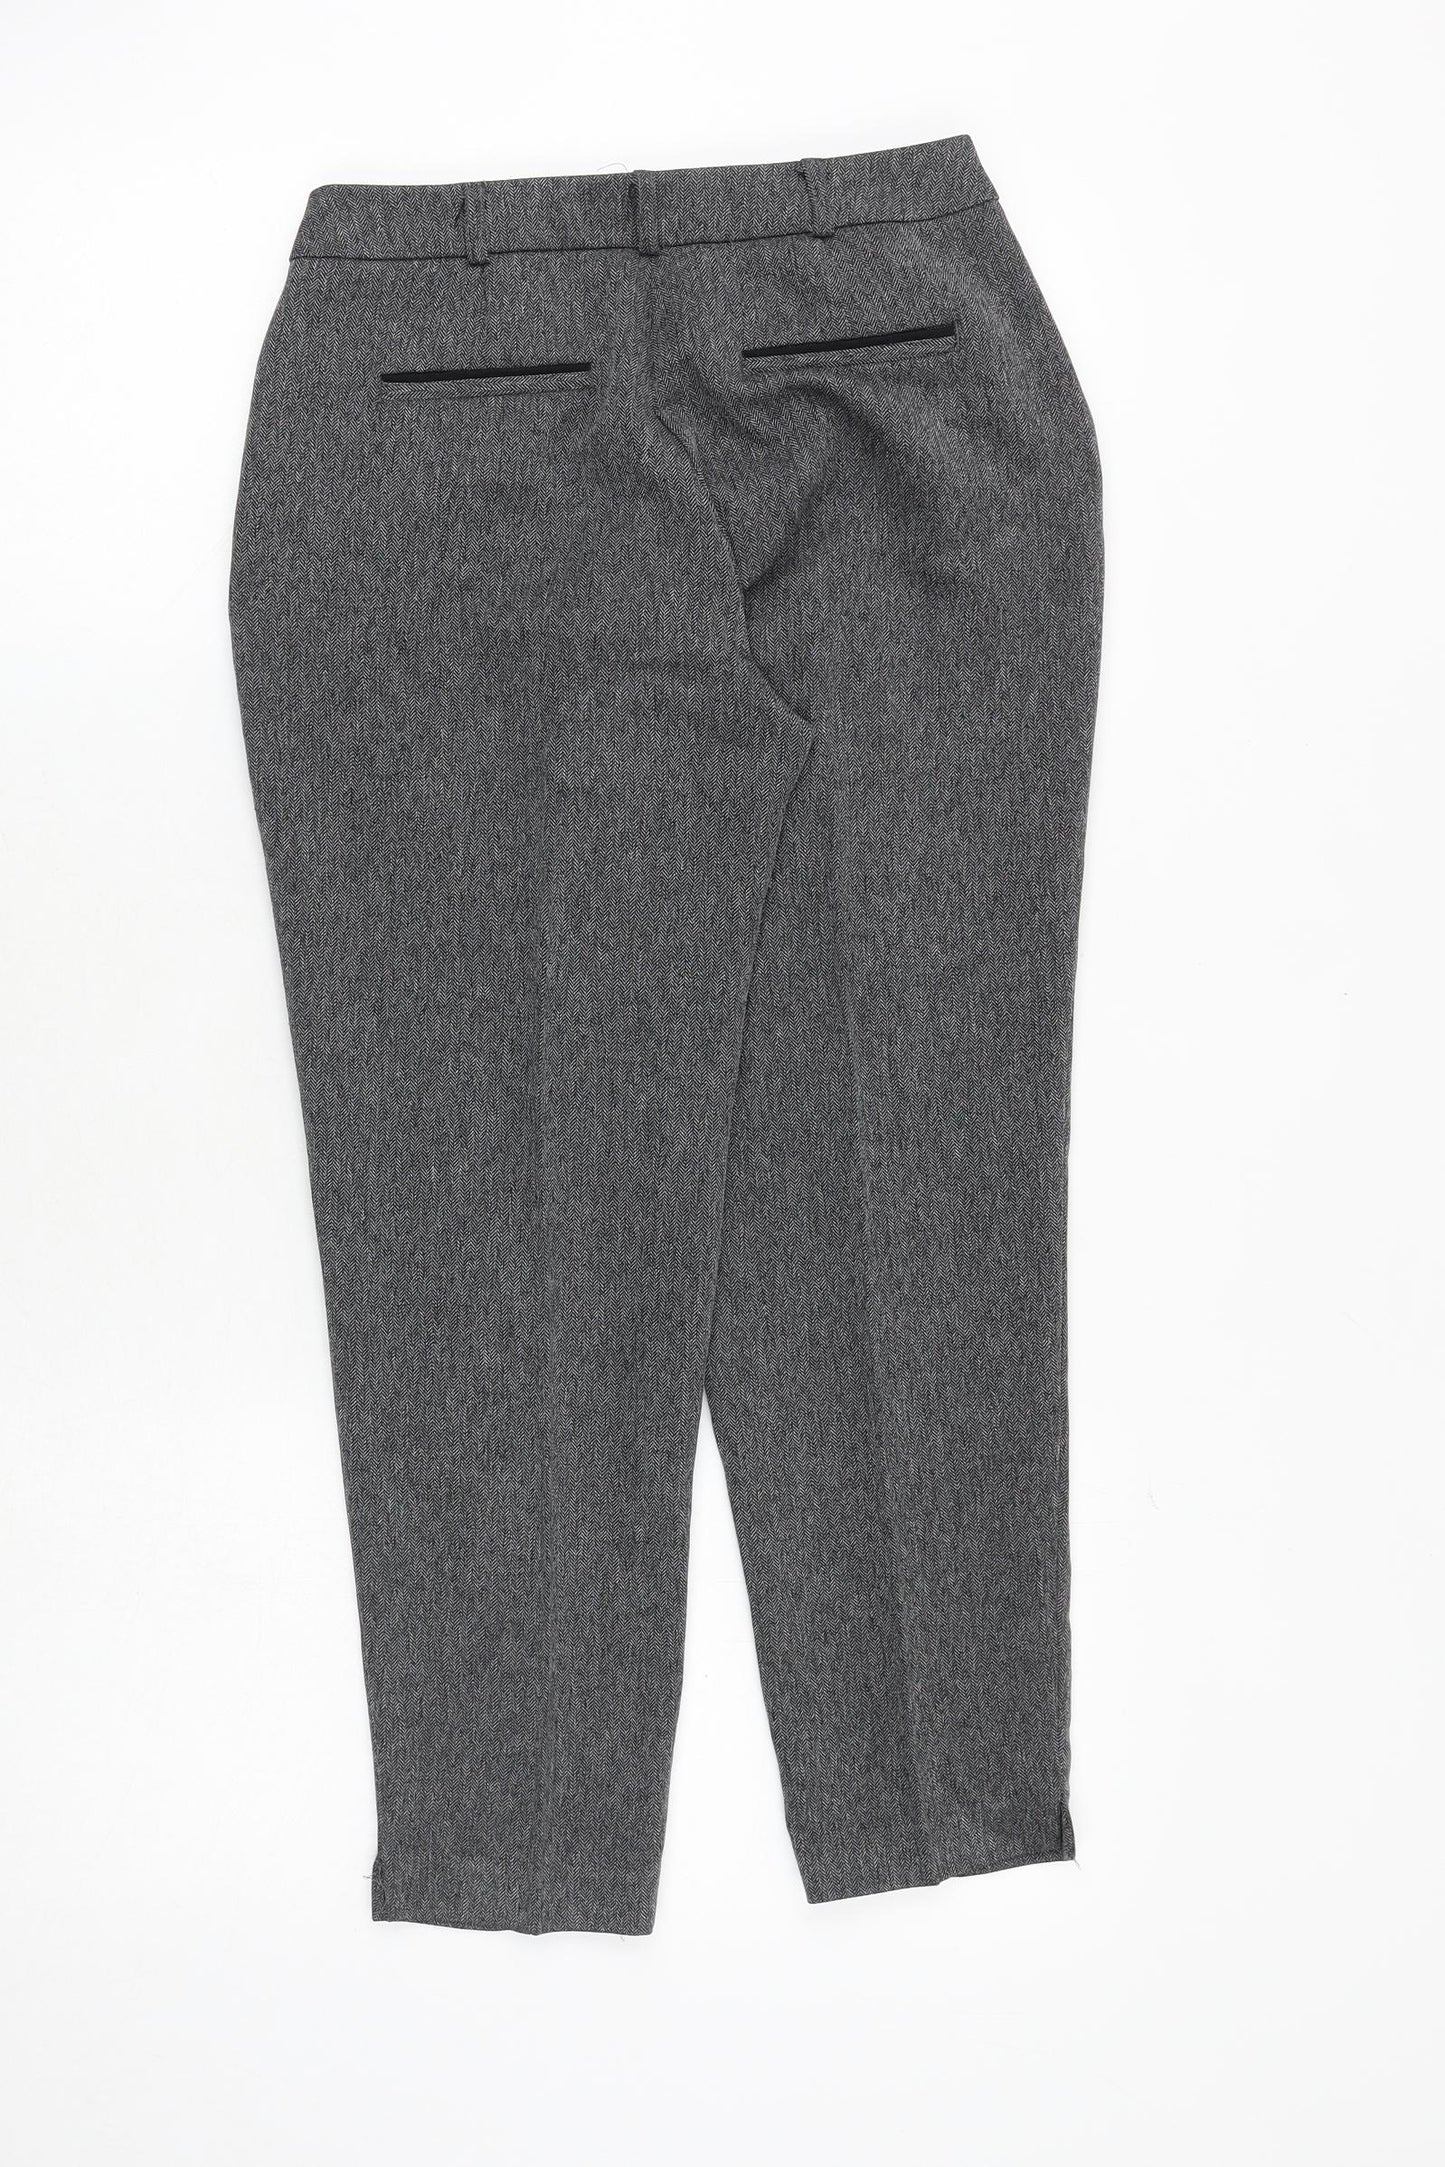 Dorothy Perkins Womens Grey Polyester Chino Trousers Size 6 Regular Zip